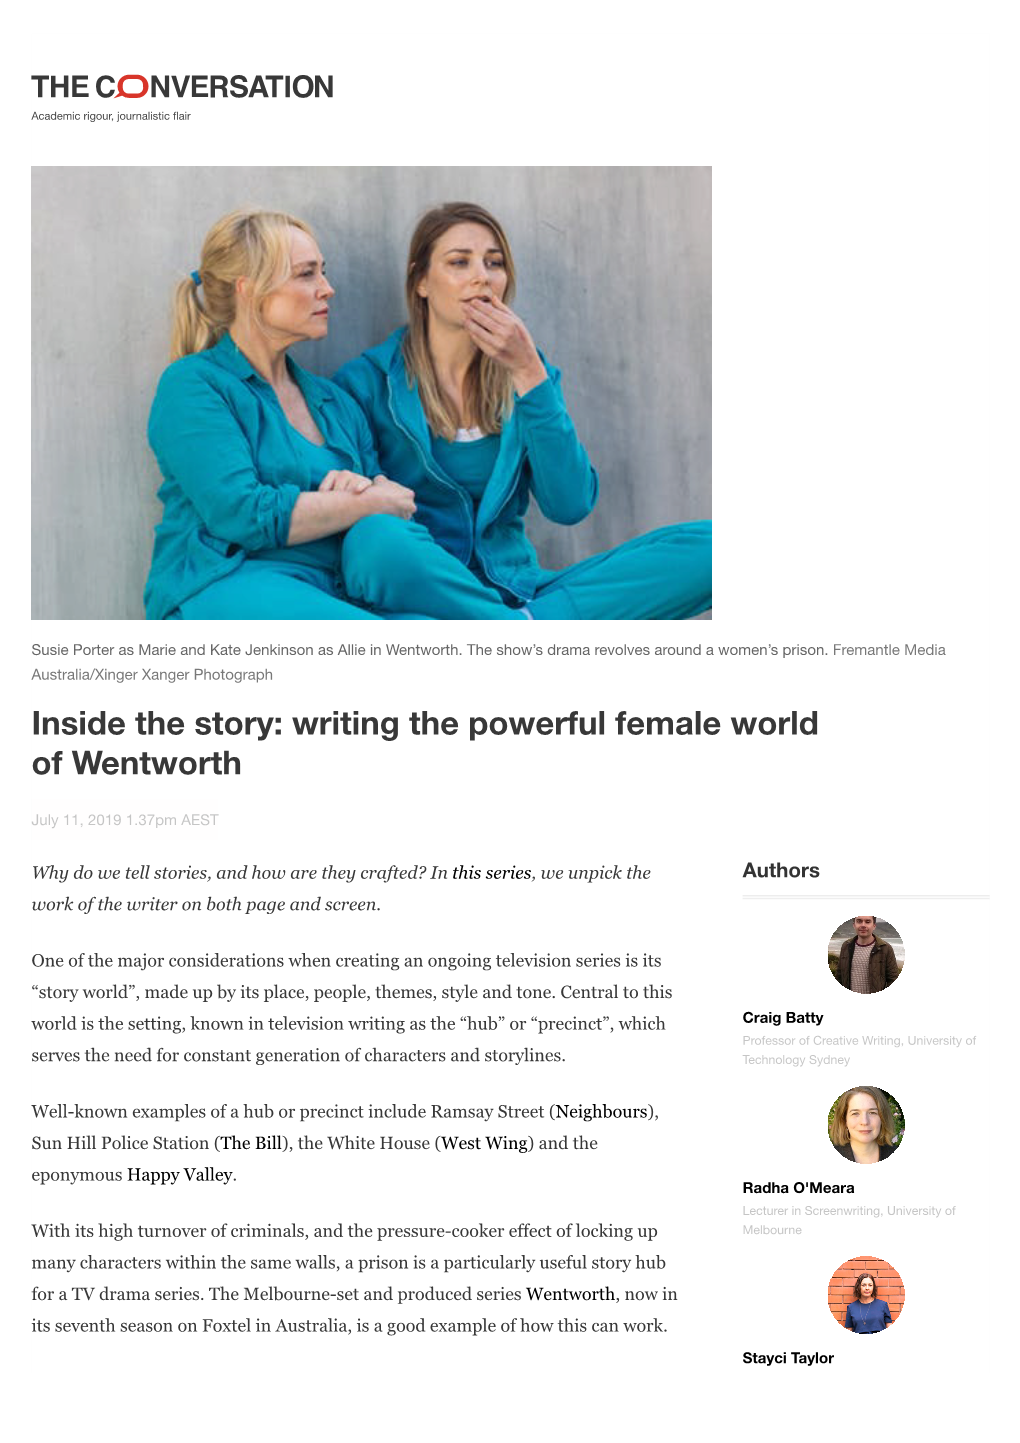 Inside the Story: Writing the Powerful Female World of Wentworth